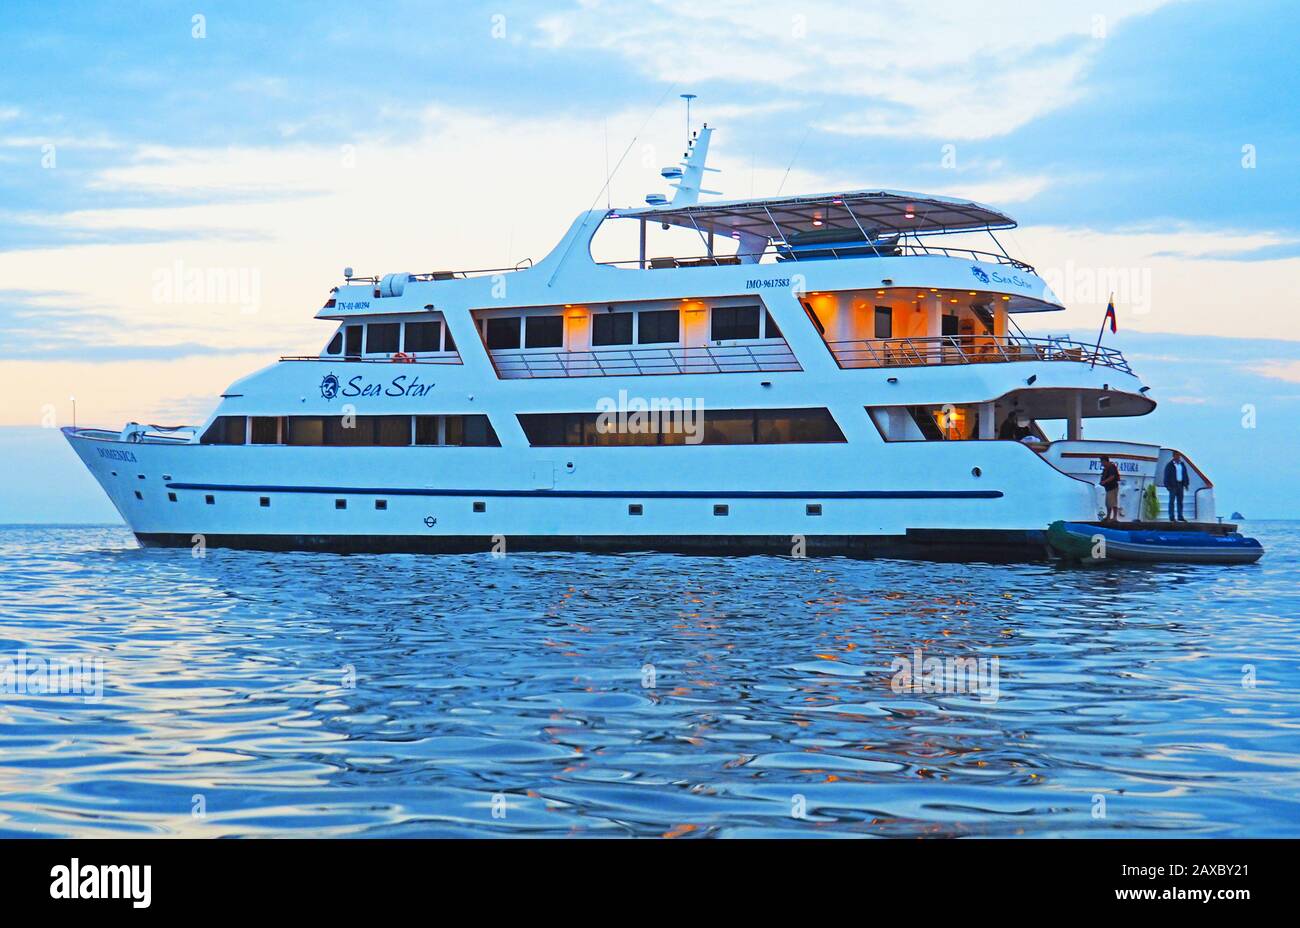 Isole Galapagos 16 pax Yacht Sea Star Journey. Foto Stock